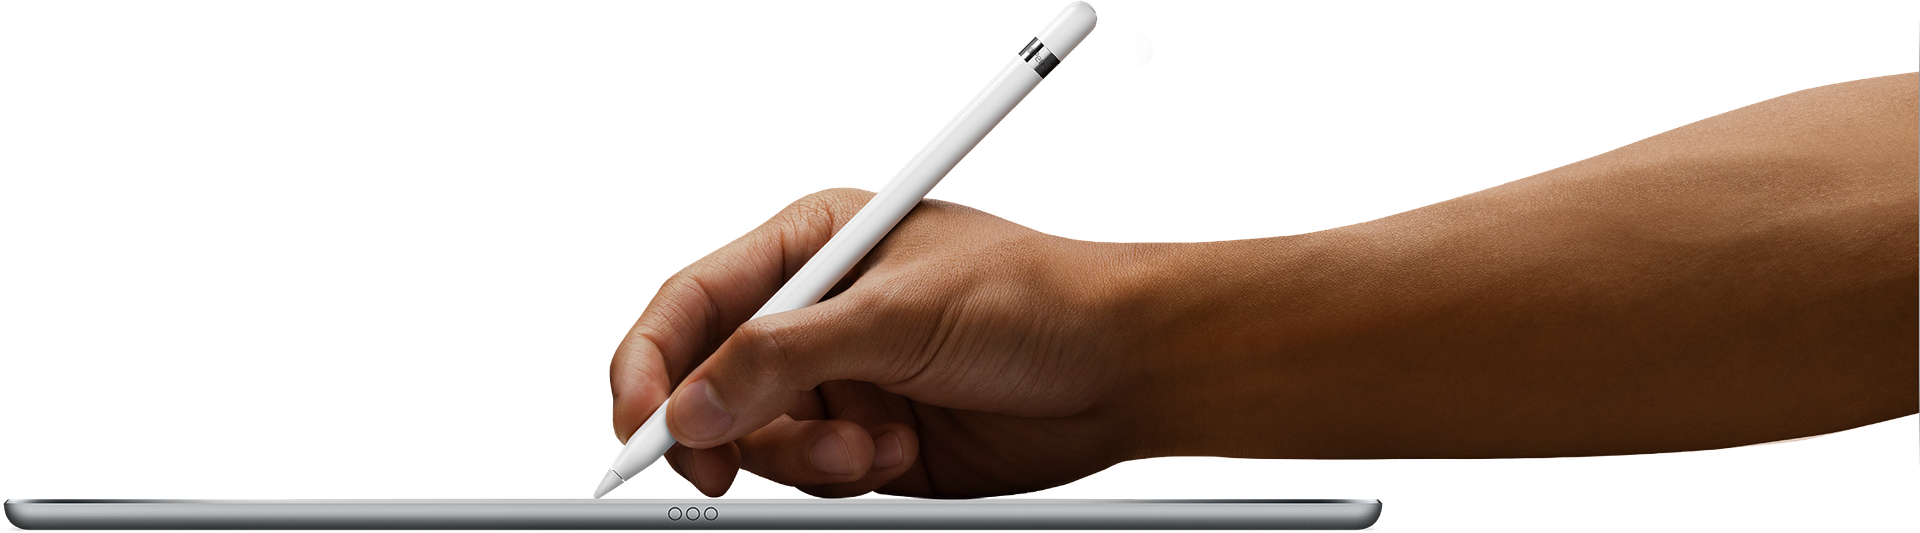 New apple pencil stylus for the iPad Pro